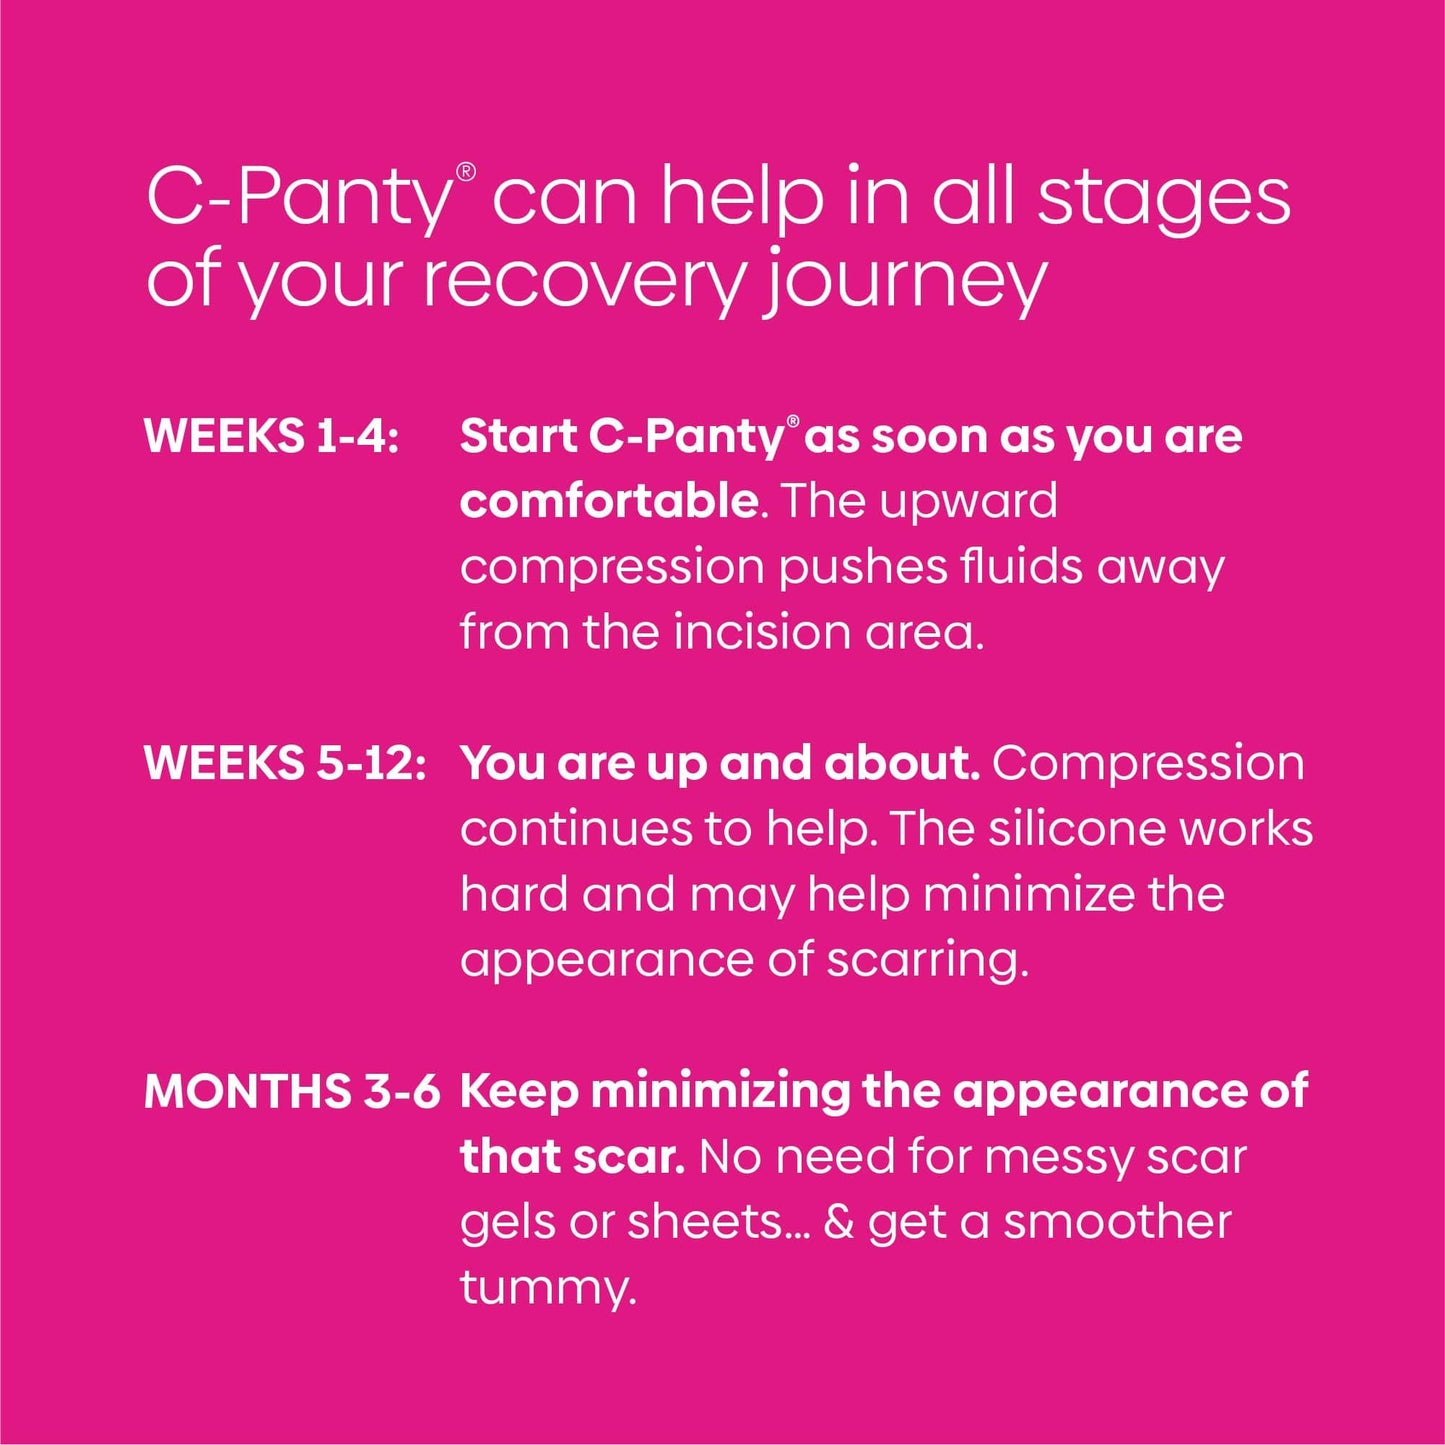 C panty helps in all stages of recovery from Week 1 through Month 6